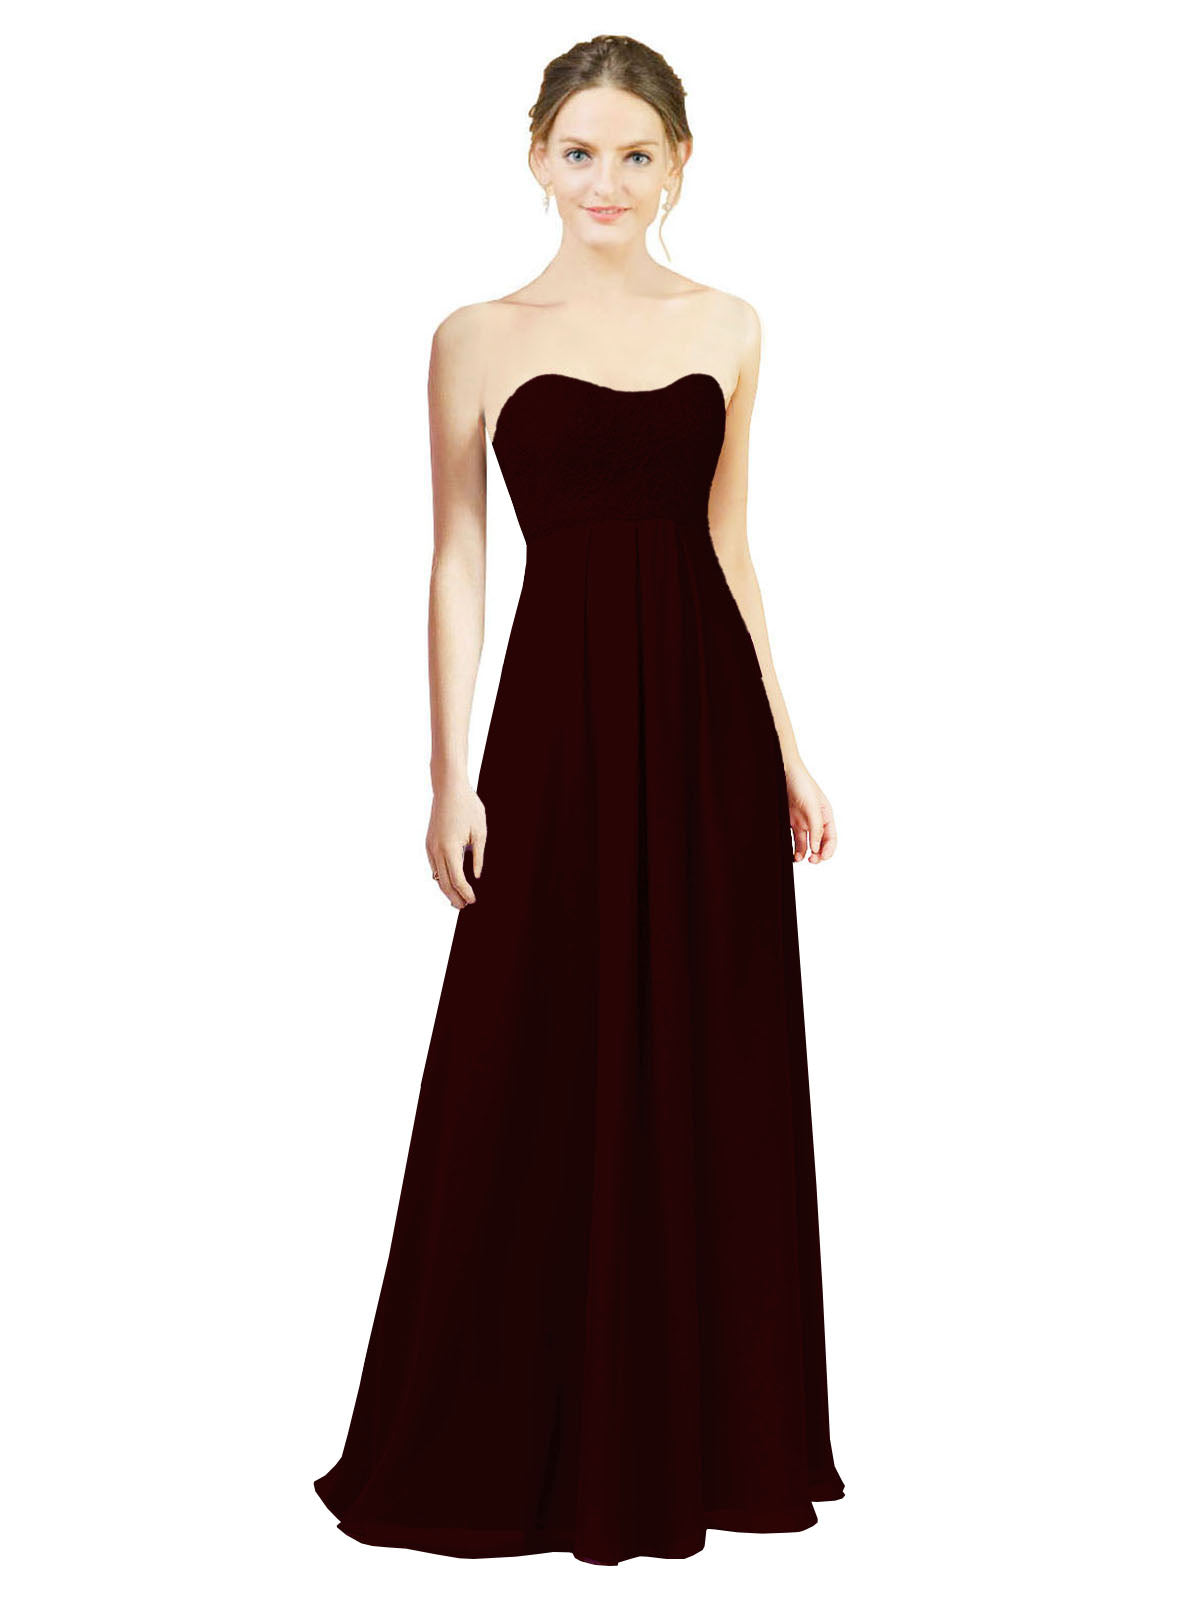 Burgundy Gold A-Line Sweetheart Strapless Long Bridesmaid Dress Melany